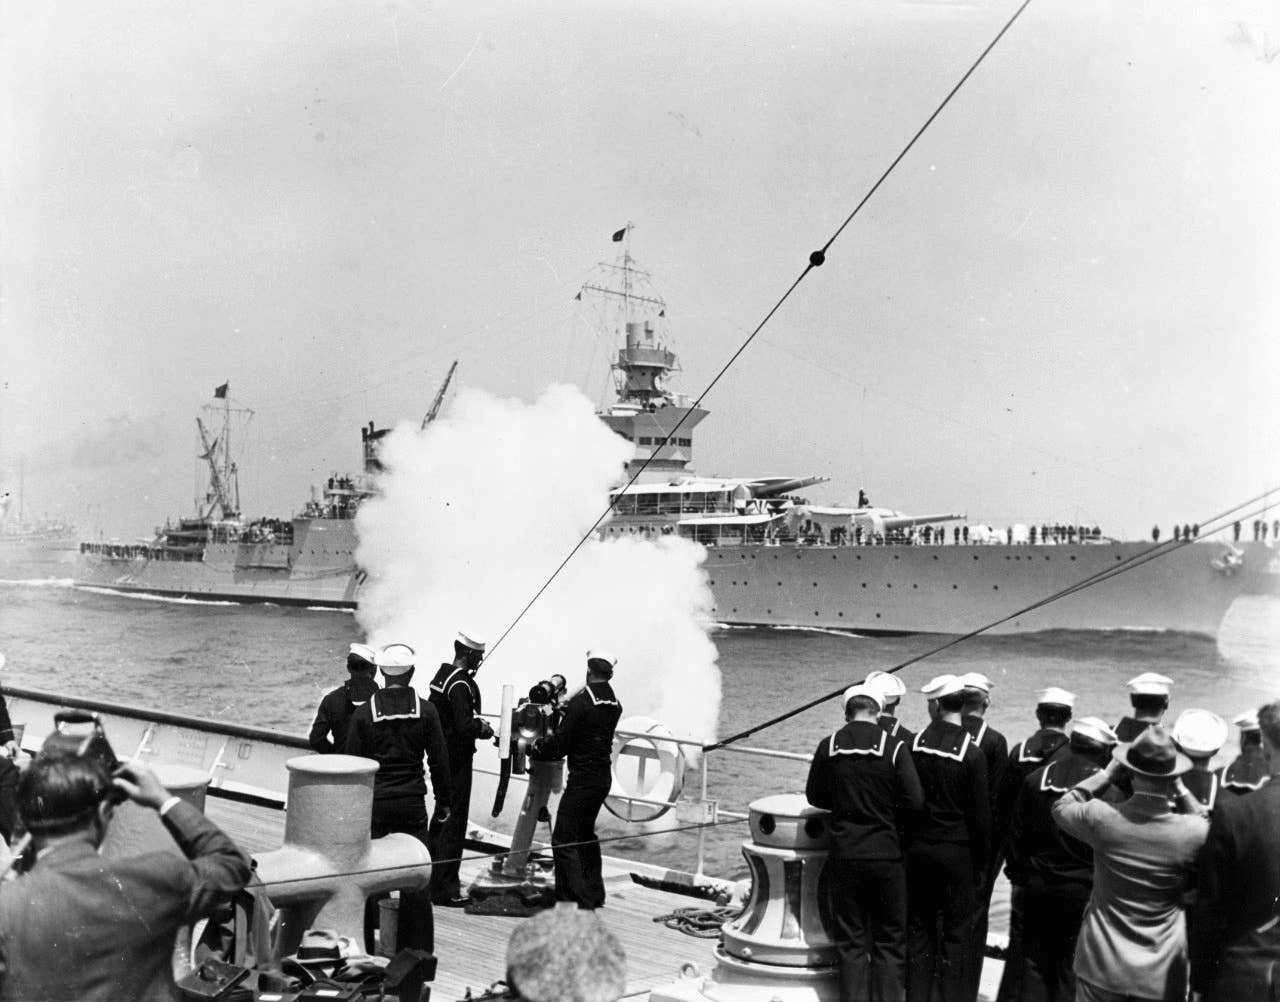 President Franklin D. Roosevelt, embarked on Indianapolis, receives a 21-gun salute from <a href="https://en.wikipedia.org/wiki/USCGC_Mojave_(WPG-47)" target="_blank" rel="noreferrer noopener">Coast Guard Cutter Mojave</a>, during the presidential fleet, 1934.